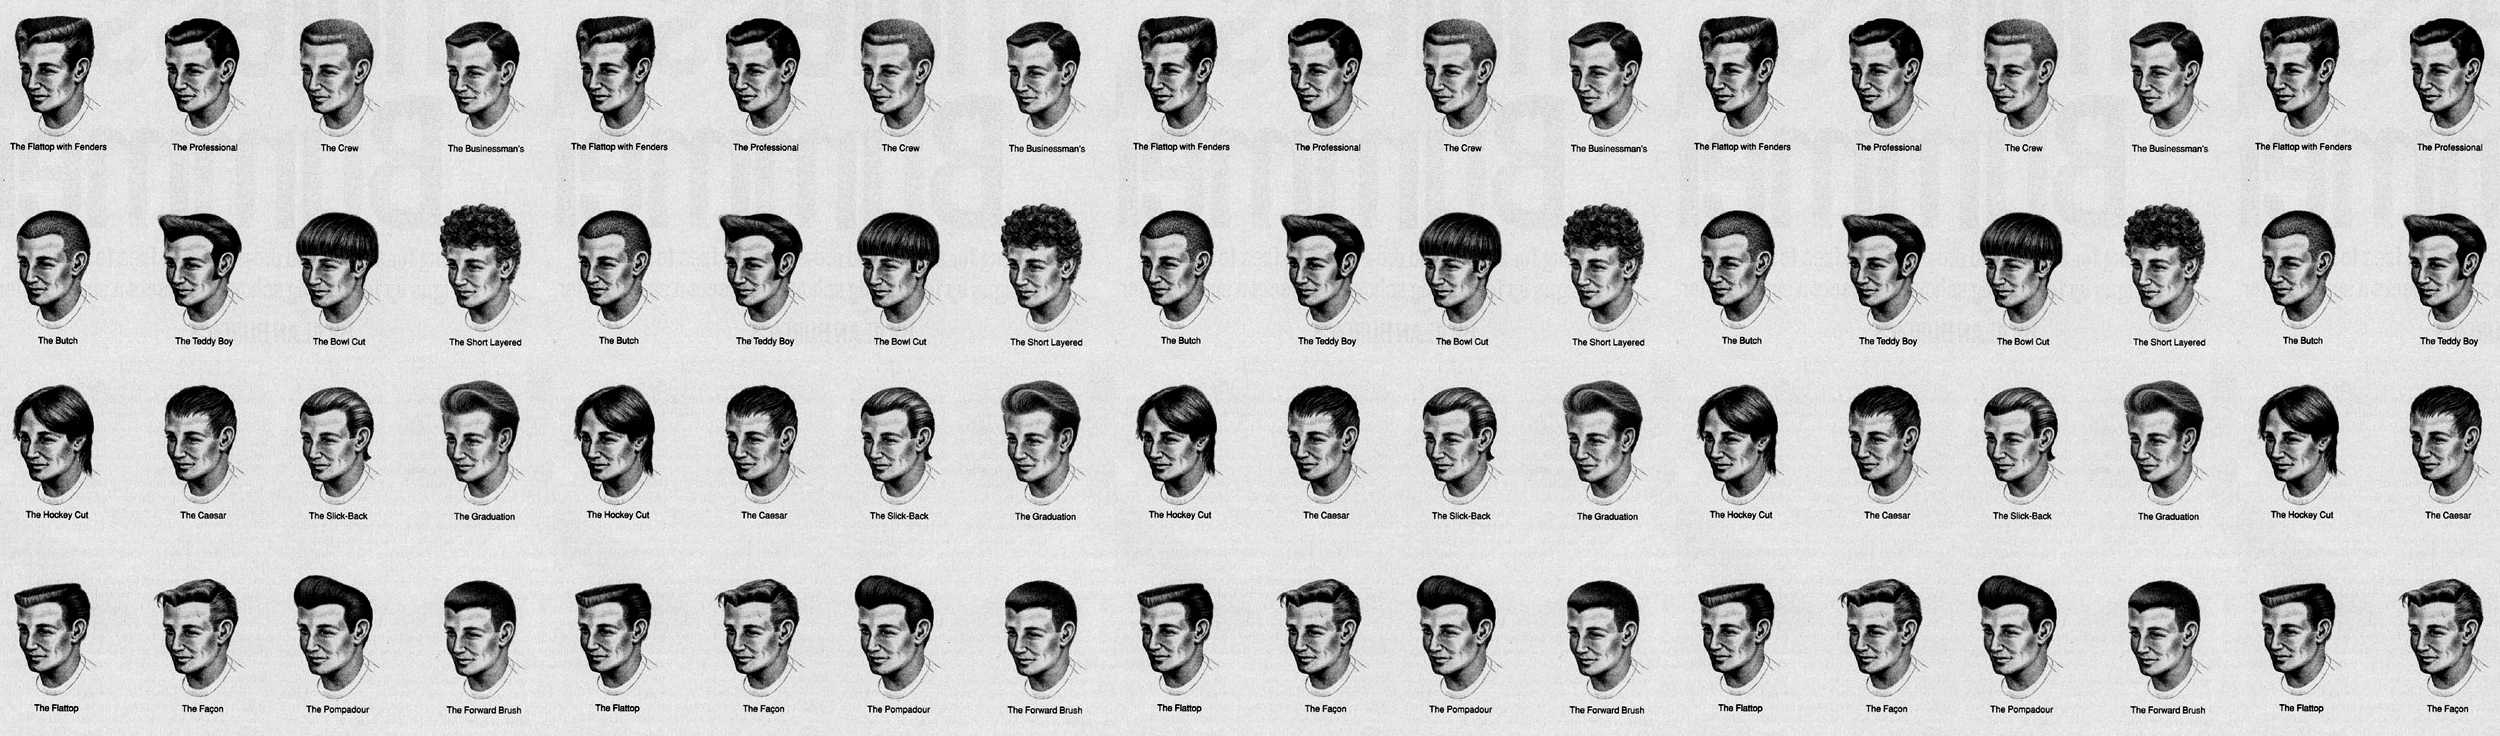 Haircut Styles For Men Chart